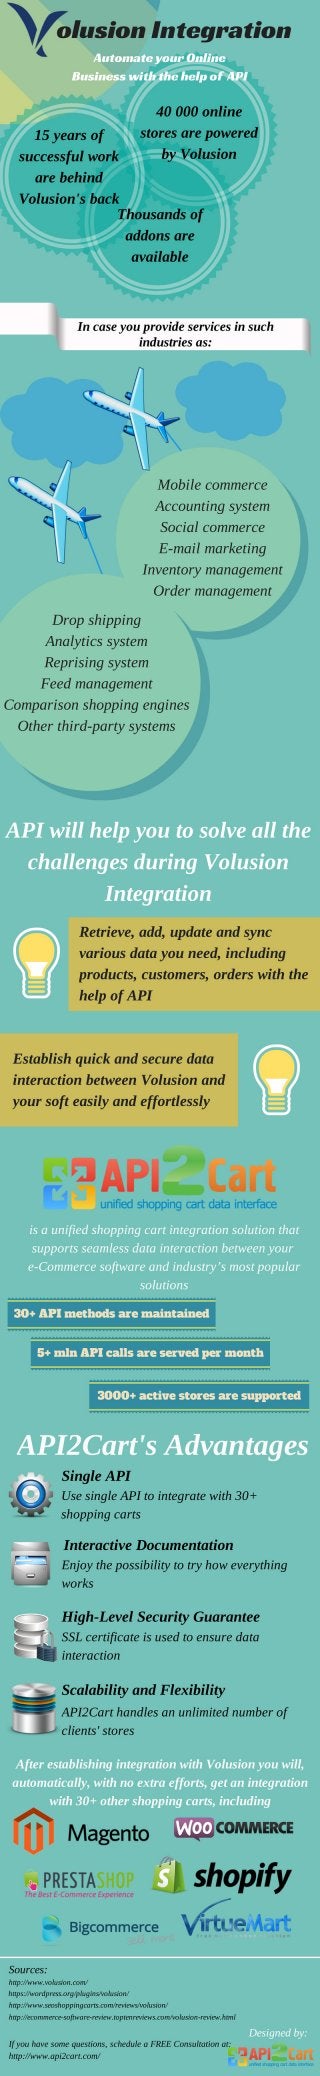 Volusion Integration: Automate your Online Business with the Help of API